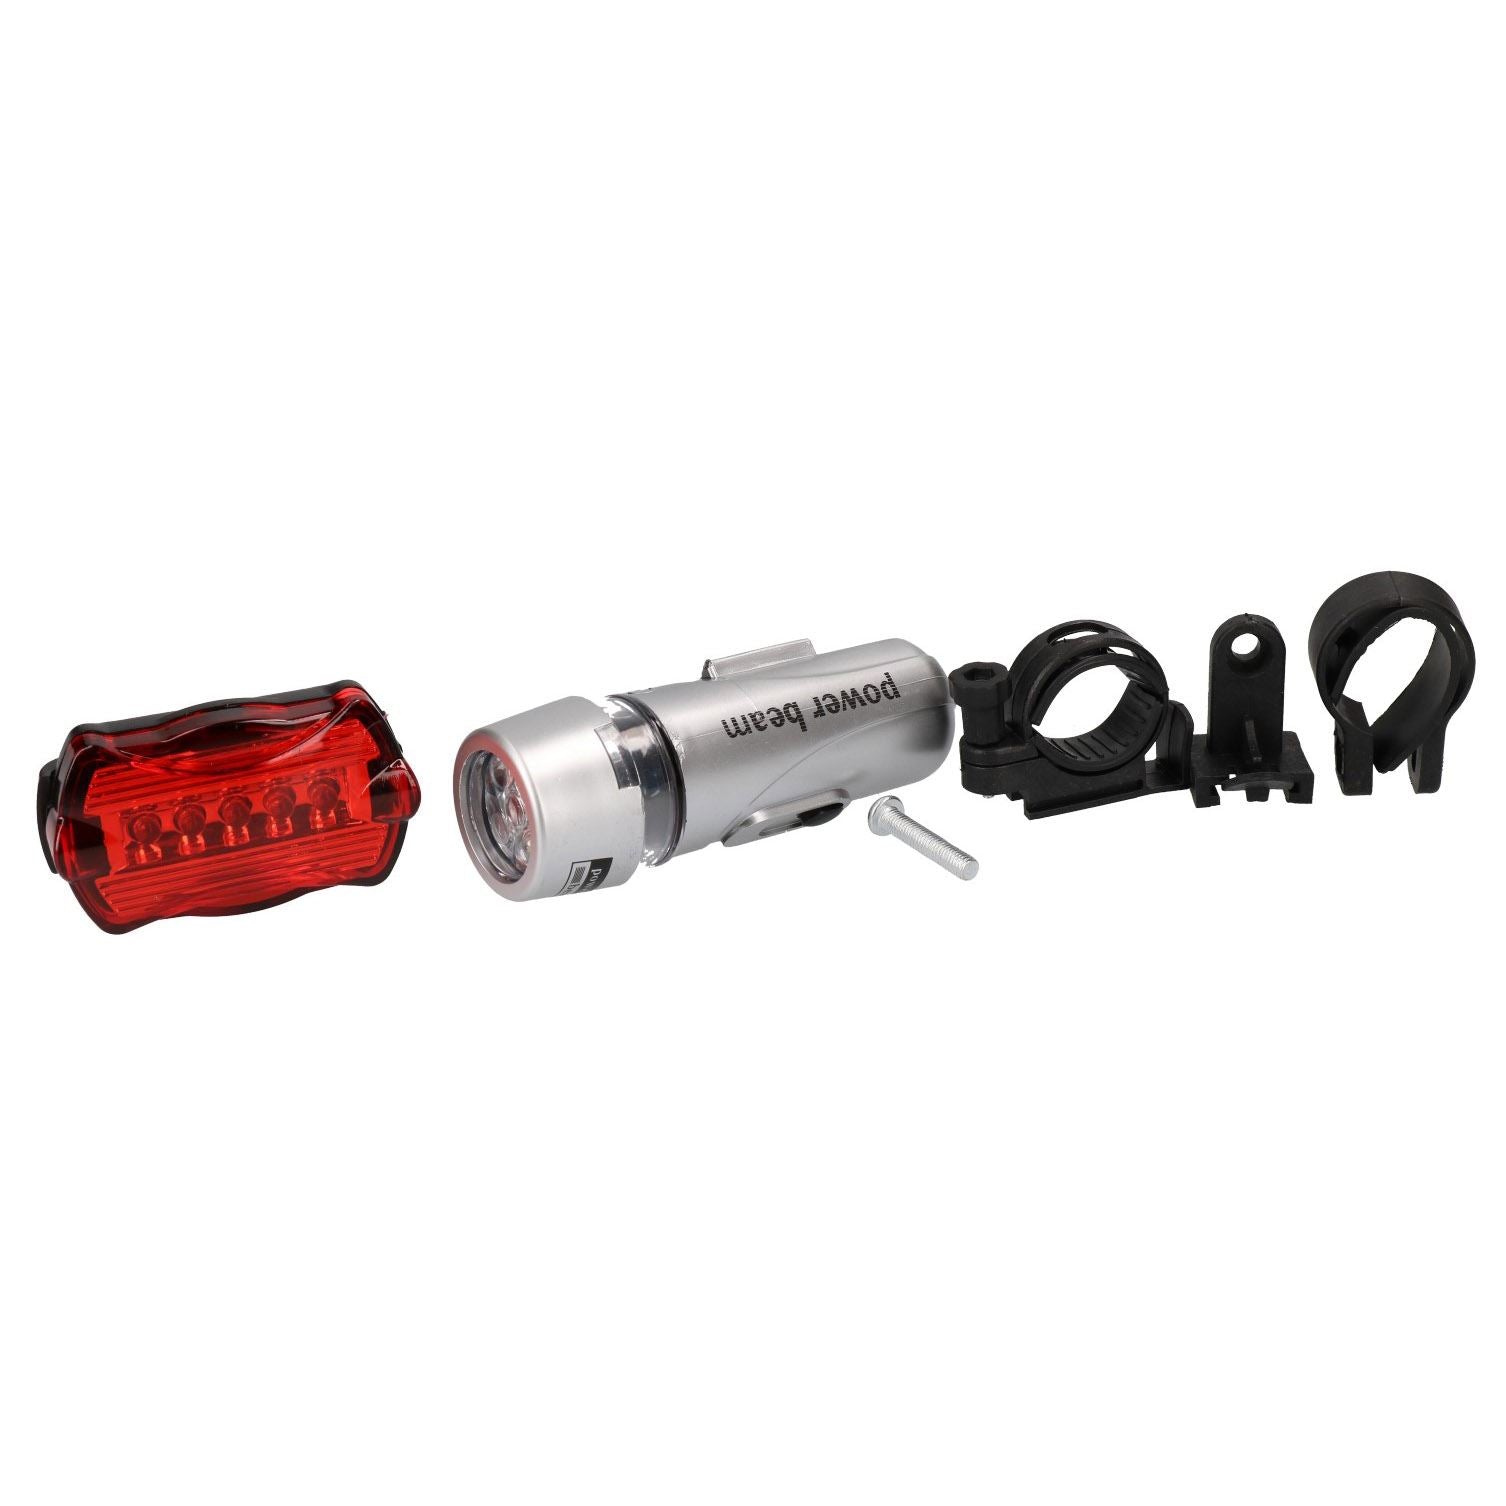 2pc 5 Led Bicycle Mountain Bike Cyle Lights Front & Rear Waterproof Lamp Torch